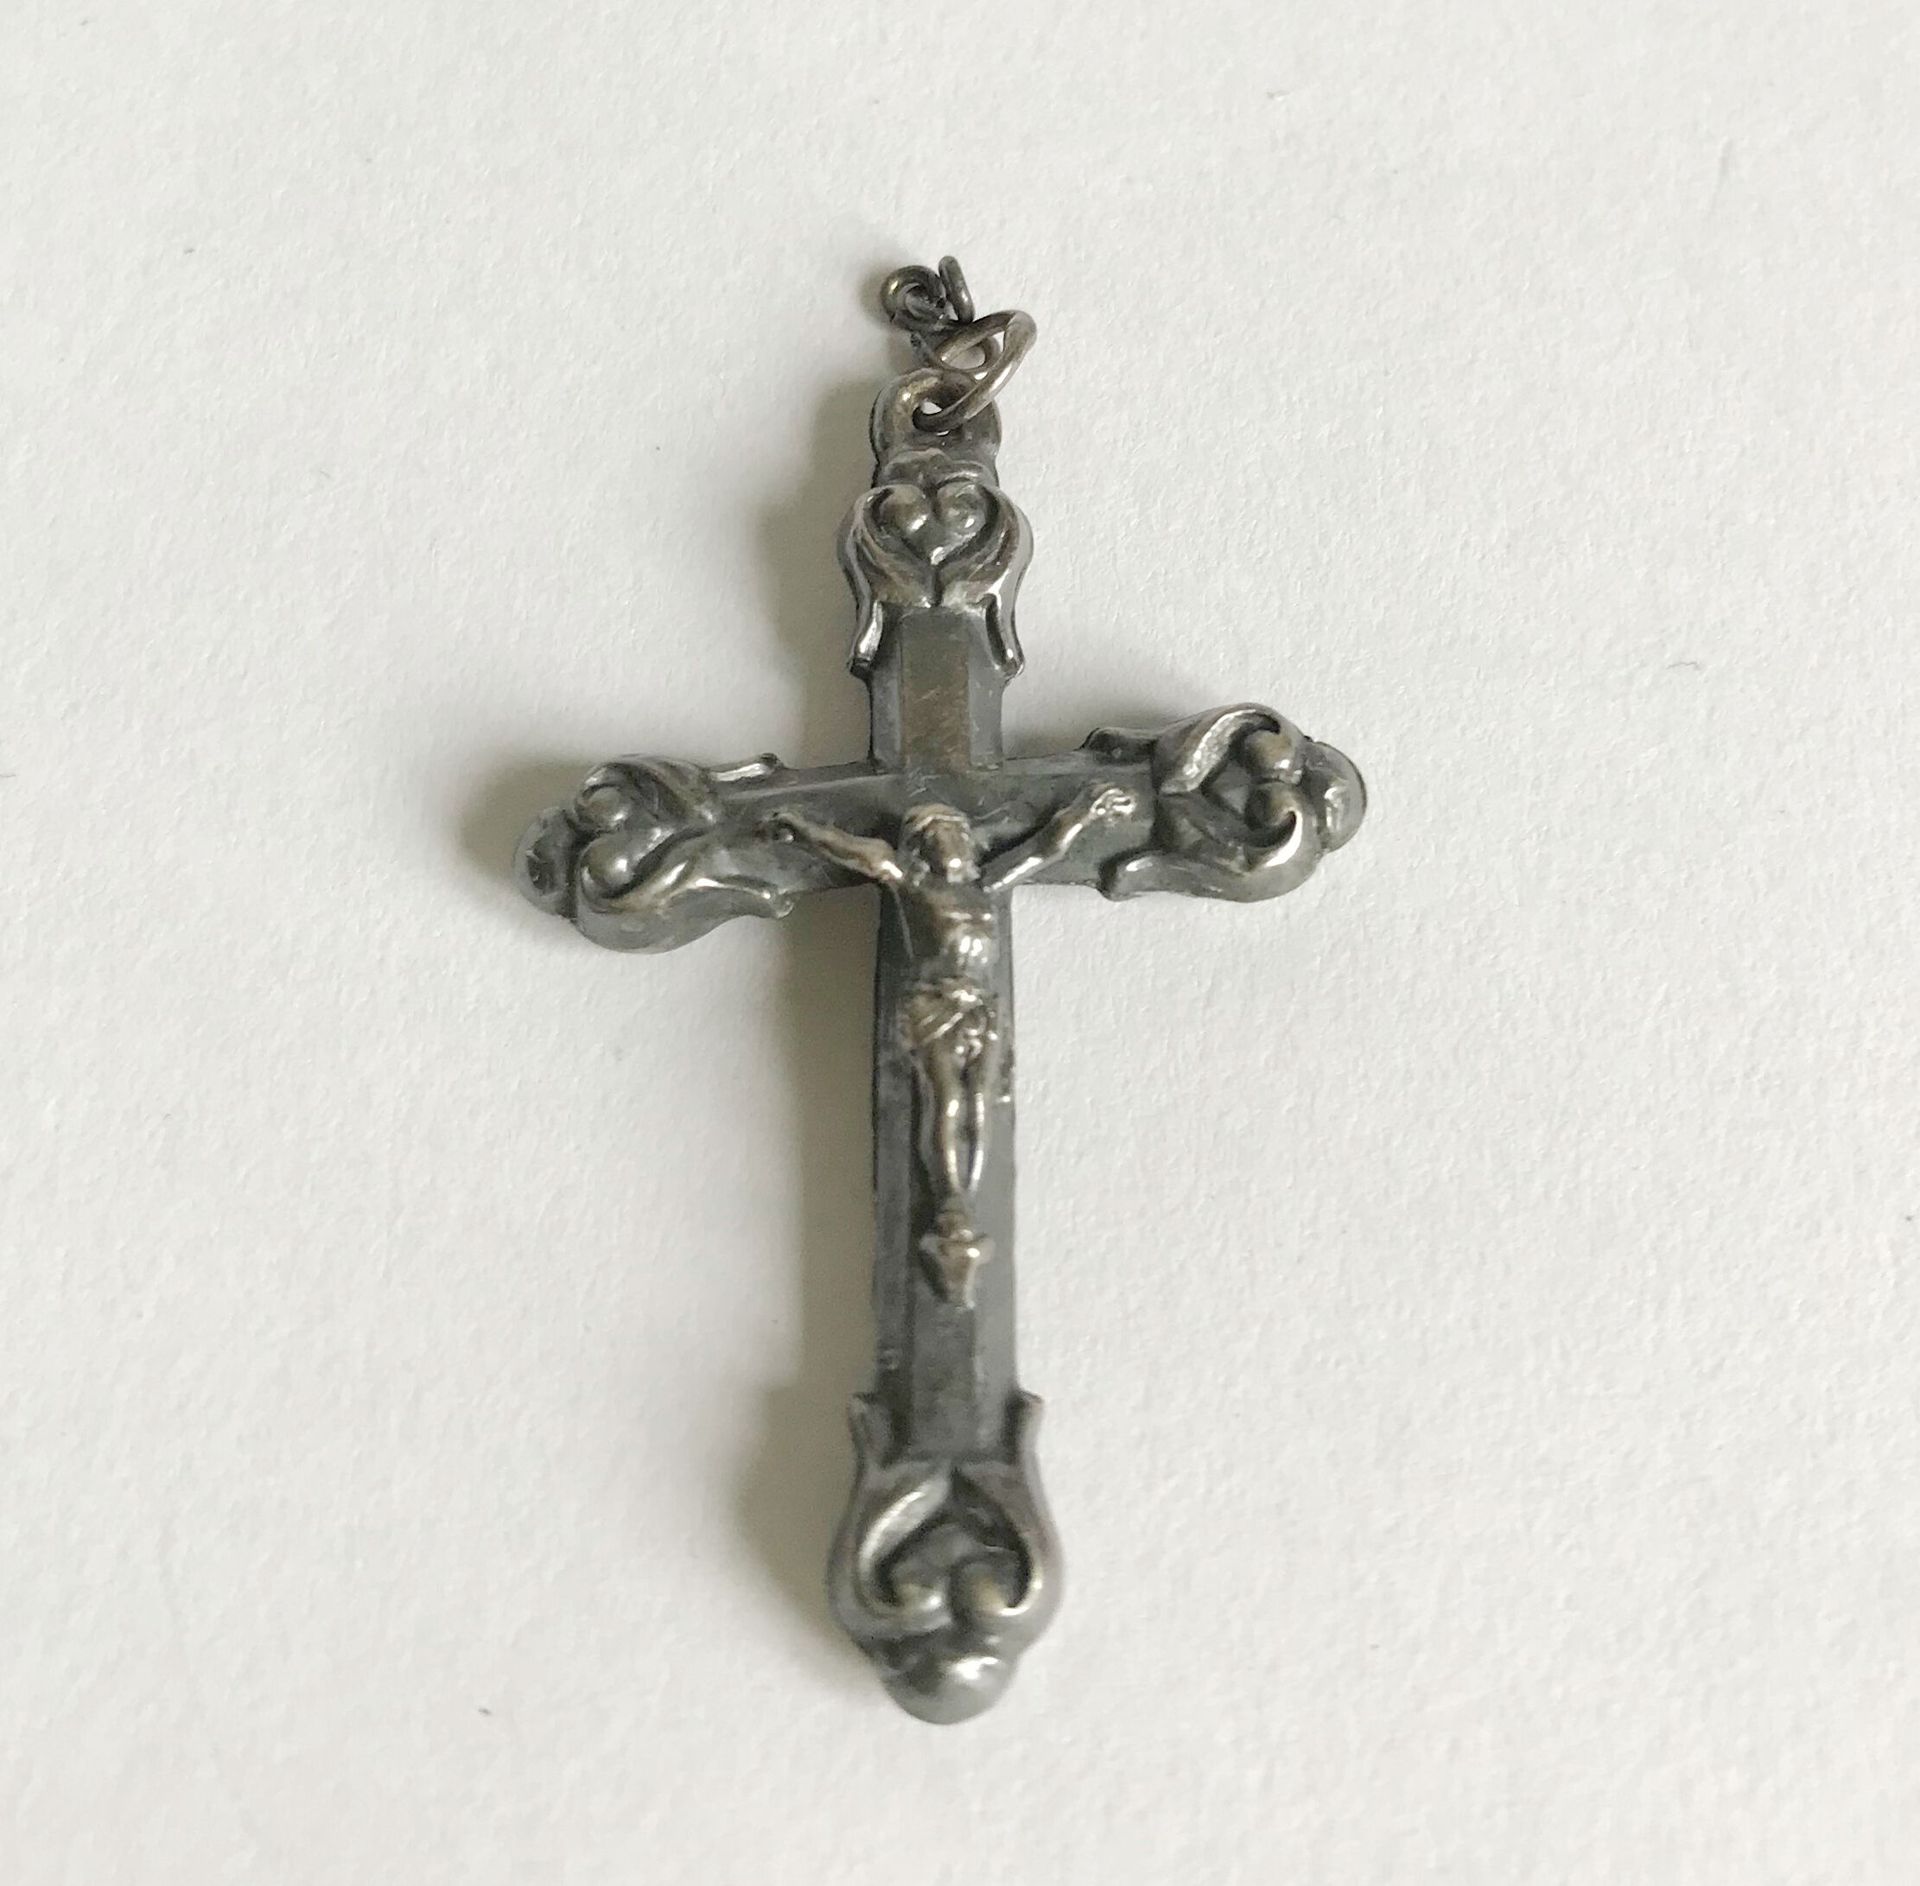 Null Medallion cross in silver. End of the XIXth century
Weight : 1 g.